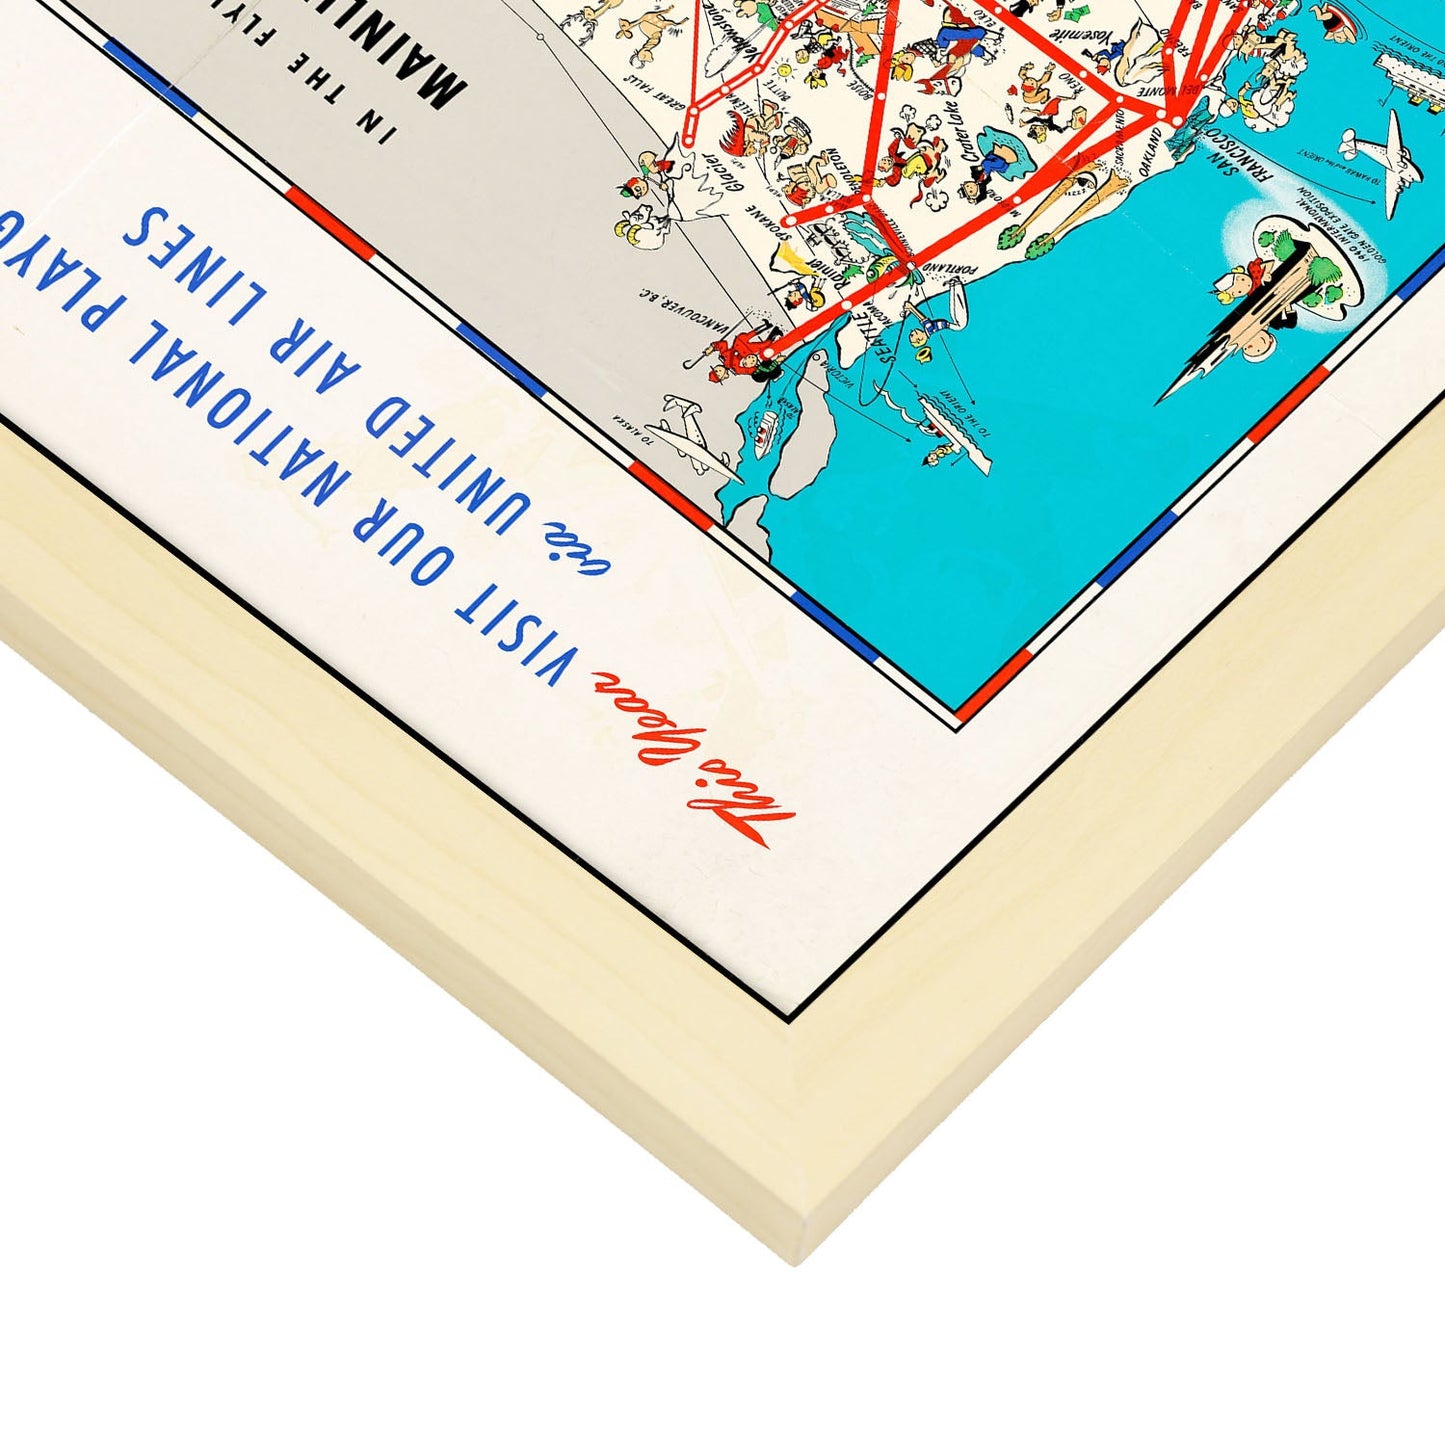 United_Air_Lines_mainliner_vacation_map_-_the_main_line_airway_to_the_nations_greatesst_vacationlands_east_and_west-Artwork-Nacnic-Nacnic Estudio SL